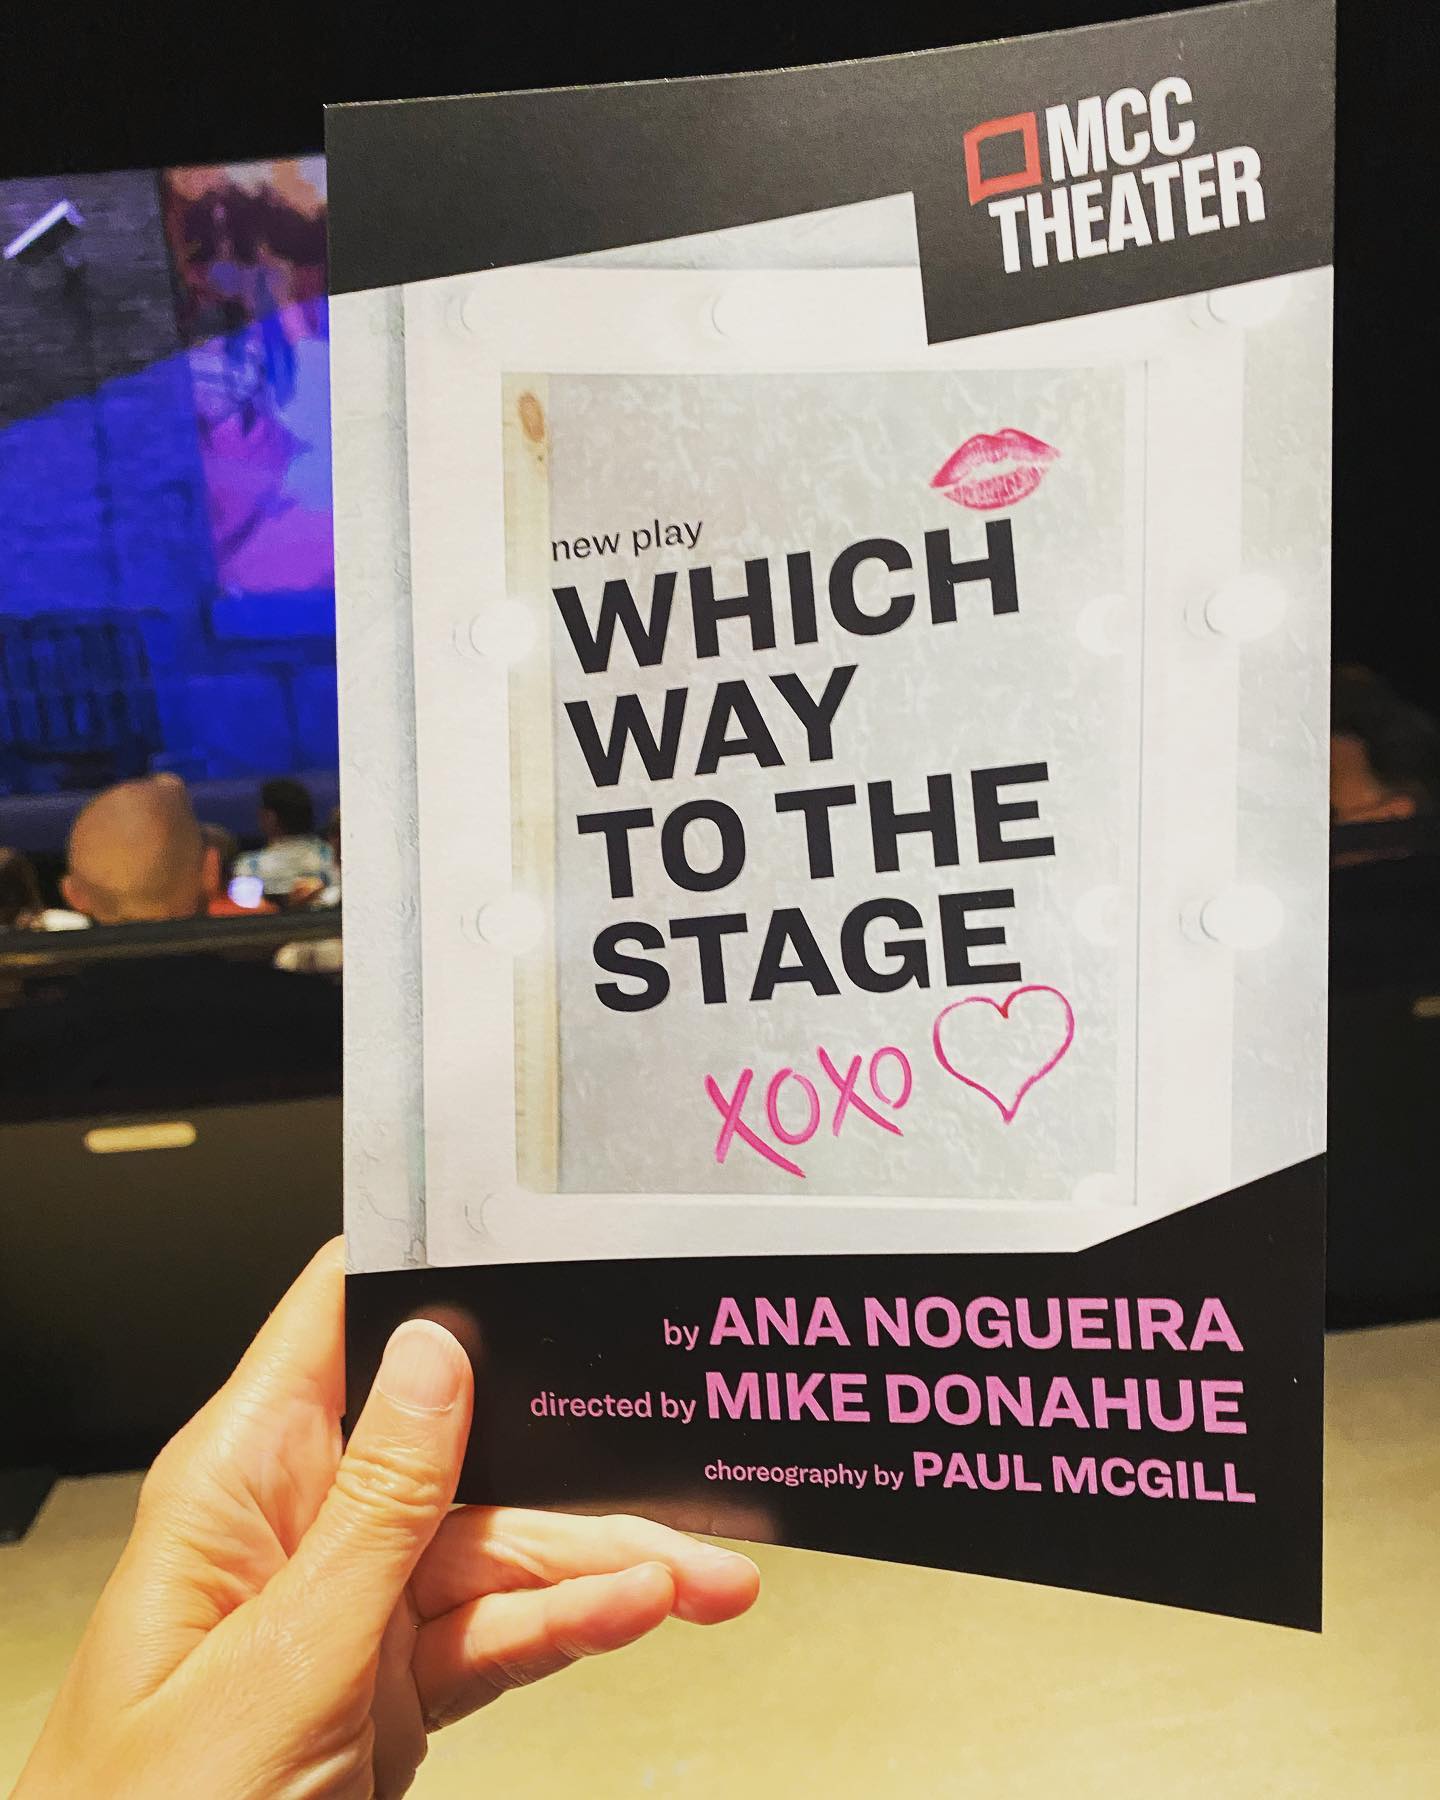 Hooray for Which Way to the Stage @mcctheater Laughed out loud and felt seen in all my theatre-loving glory. Enjoyed every comic moment these actors found along with every moment of revelation. 🎭❤️👏 #mcctheater #whichwaytothestage #offbroadway #offbroadwayplay #nyctheatre #theaternerd #musicaltheatre #iloveplays #ananogueira #nyctheatrelife